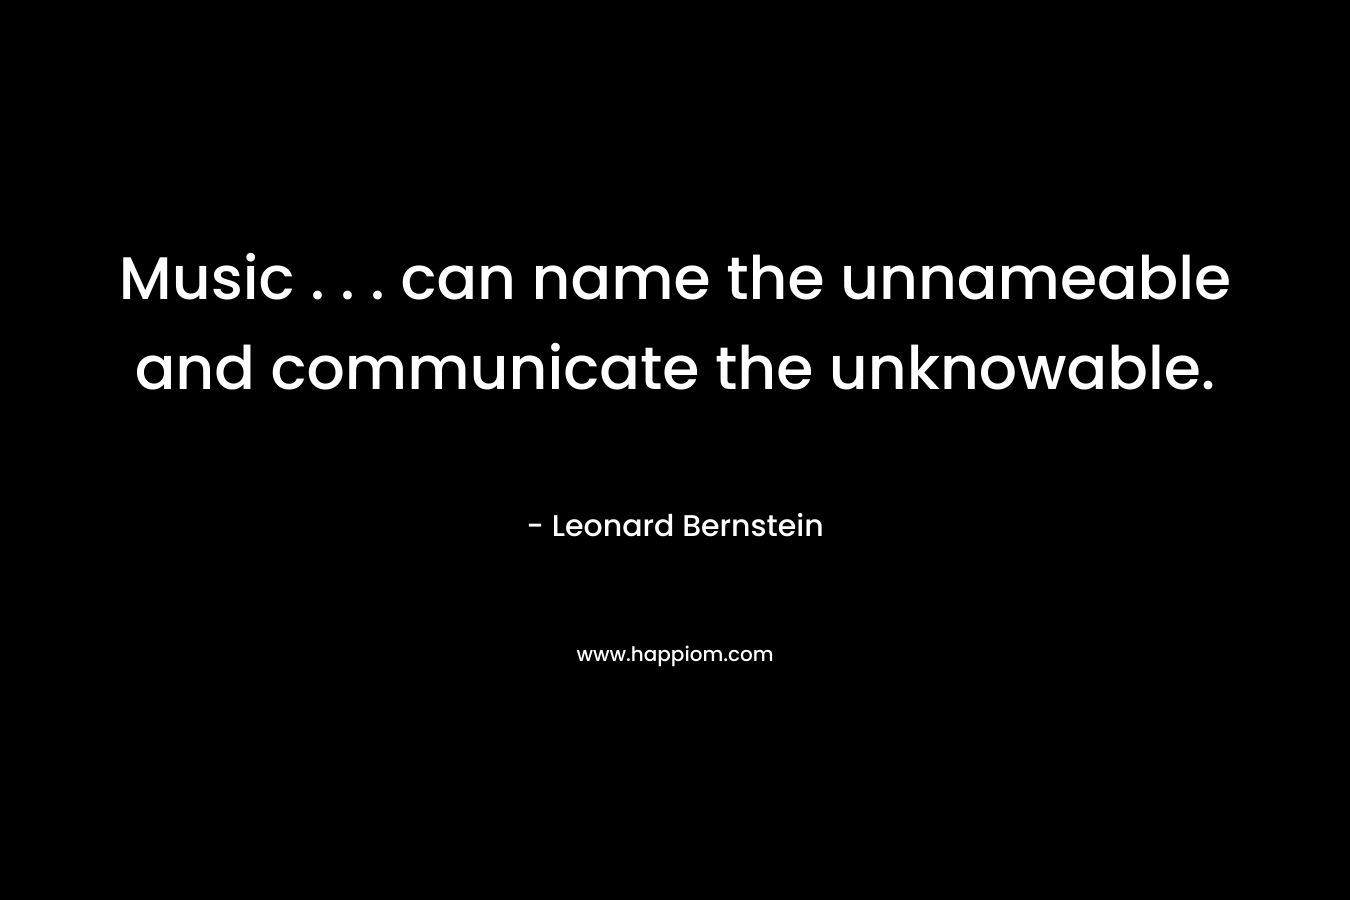 Music . . . can name the unnameable and communicate the unknowable. – Leonard Bernstein